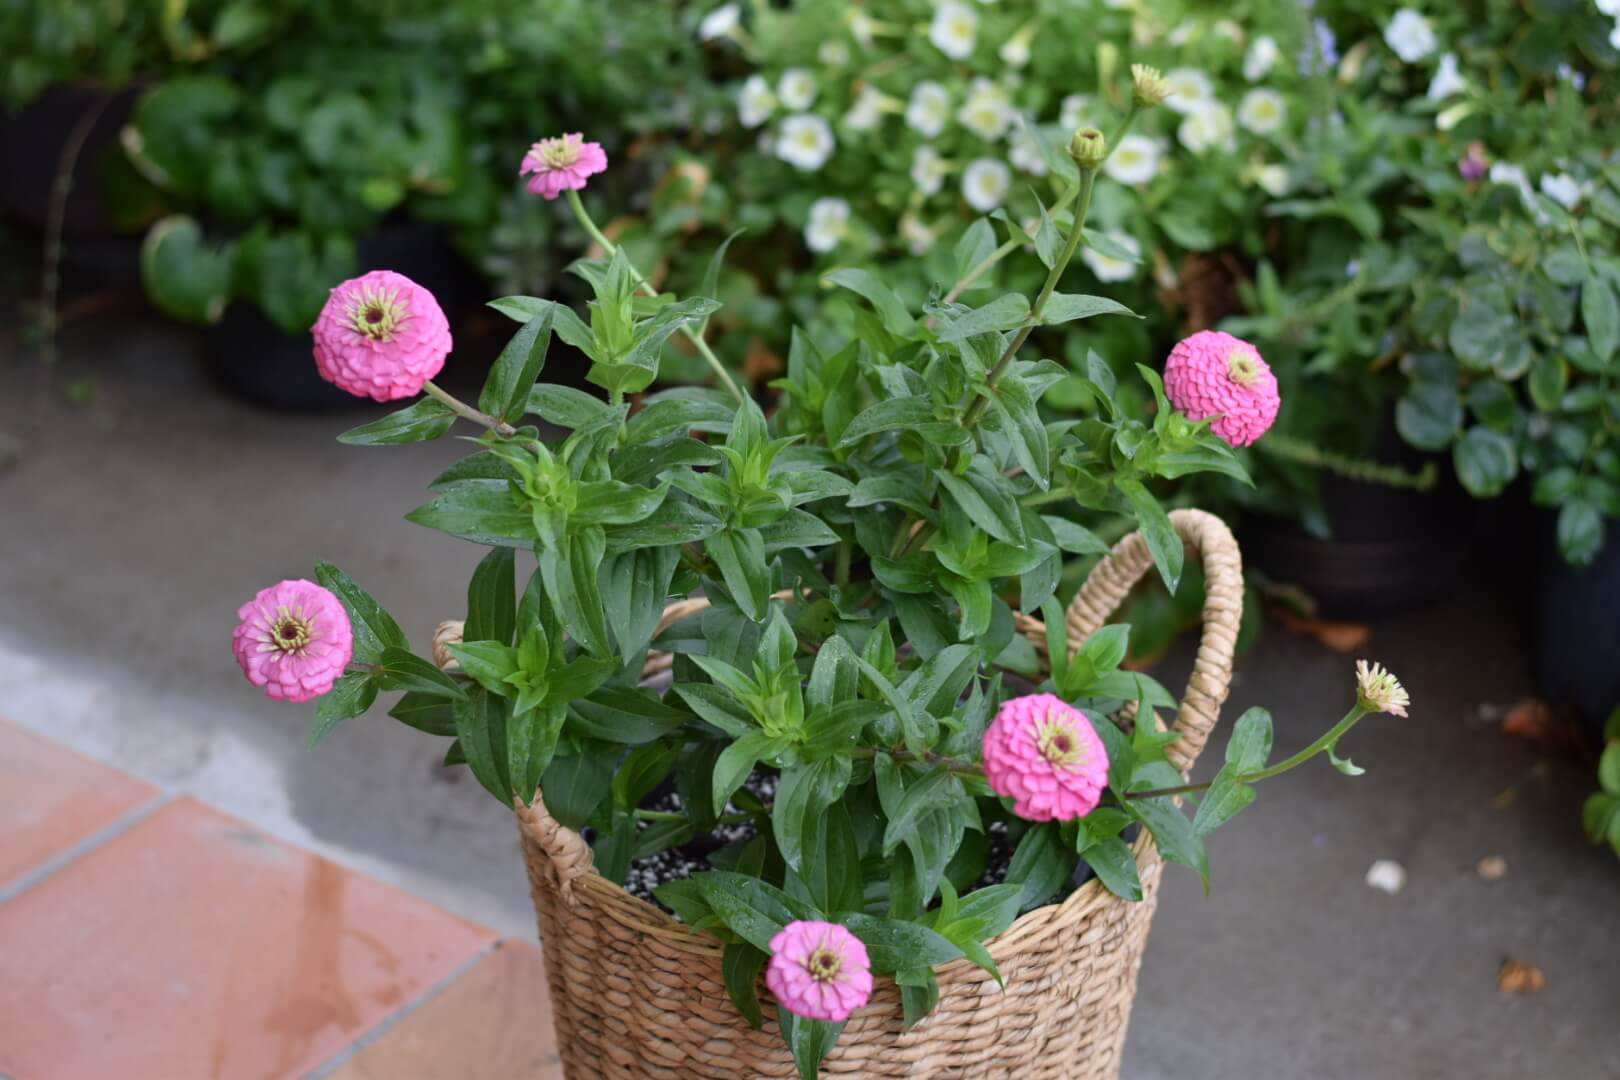 growing zinnias from seed outdoors